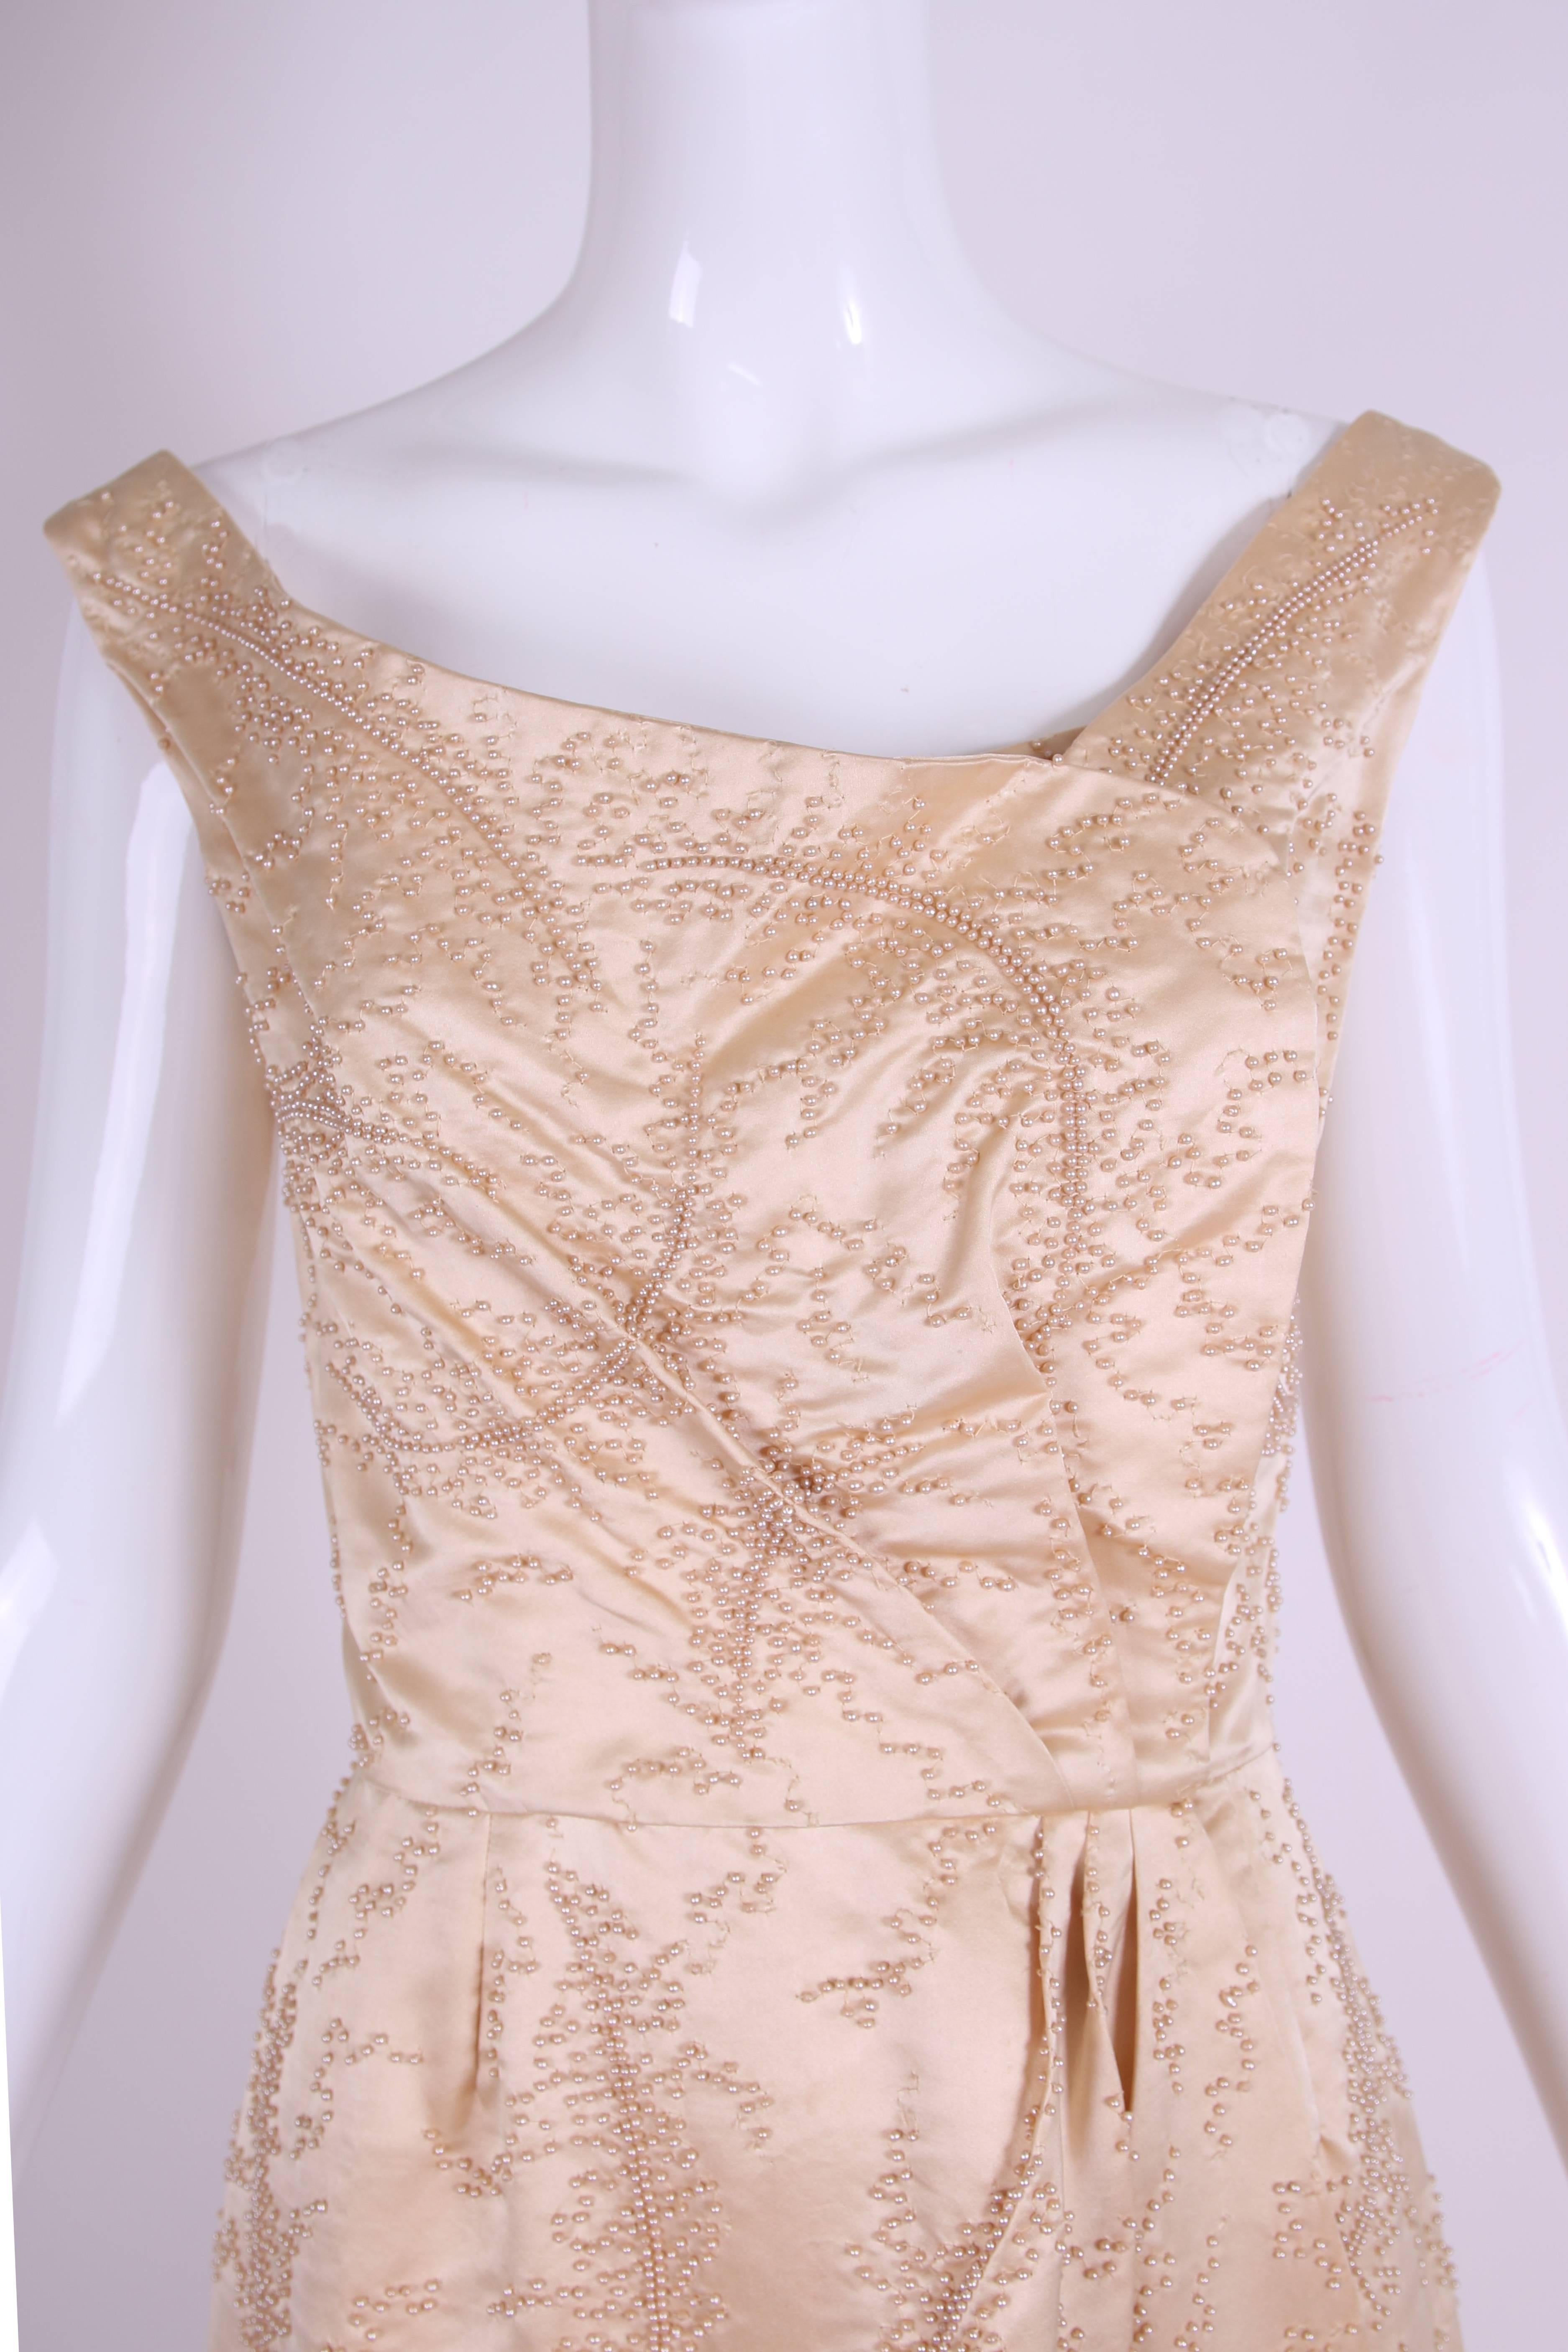 White Ceil Chapman Champagne-Colored Satin Beaded Cocktail Dress Ca. 1965 For Sale